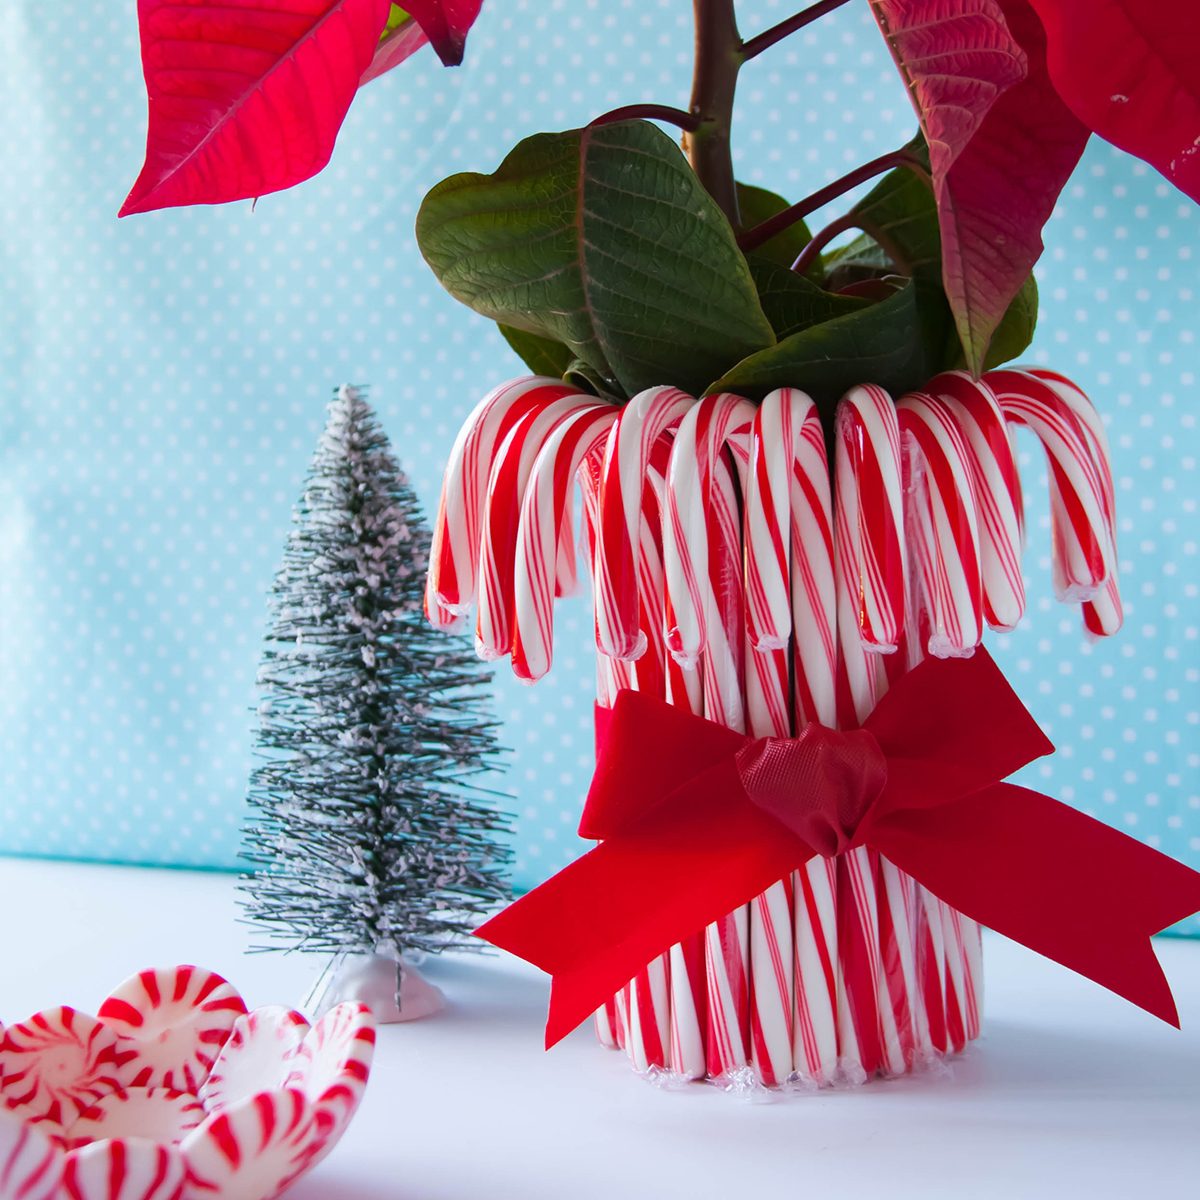 Christmas crafts using candy canes and mints